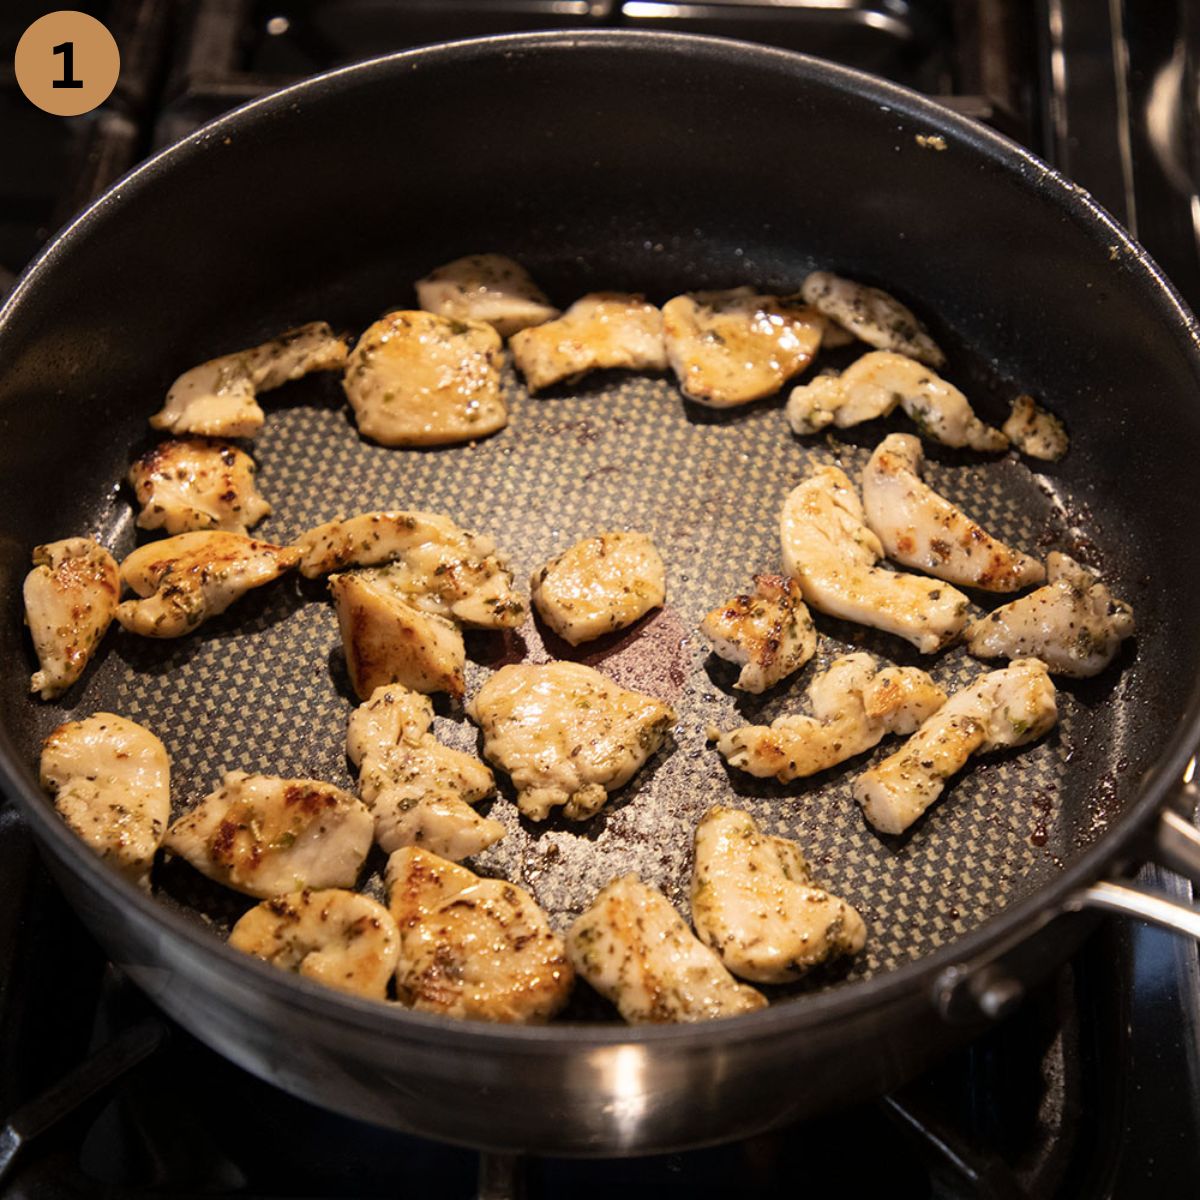 sauteing chicken breast pieces in a large skillet.